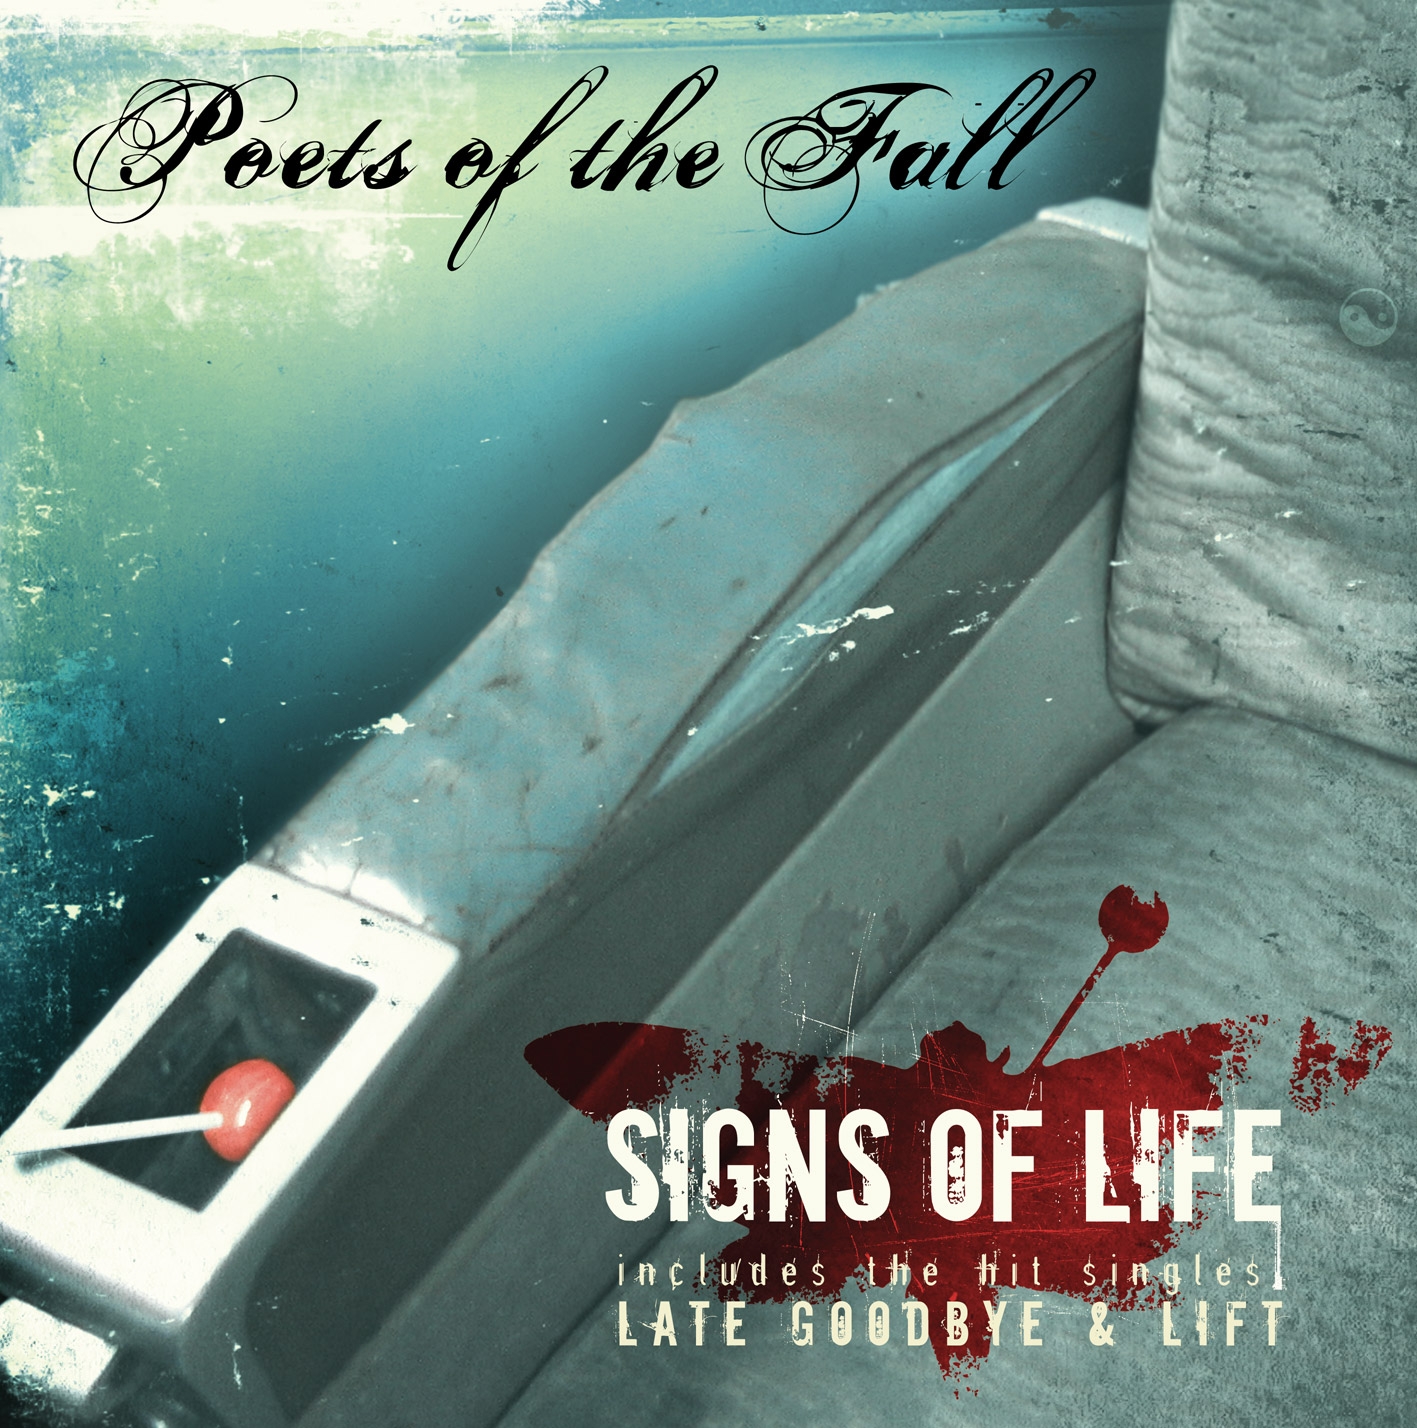 Poets of the Fall - Signs Of Life (curacao vinyl)